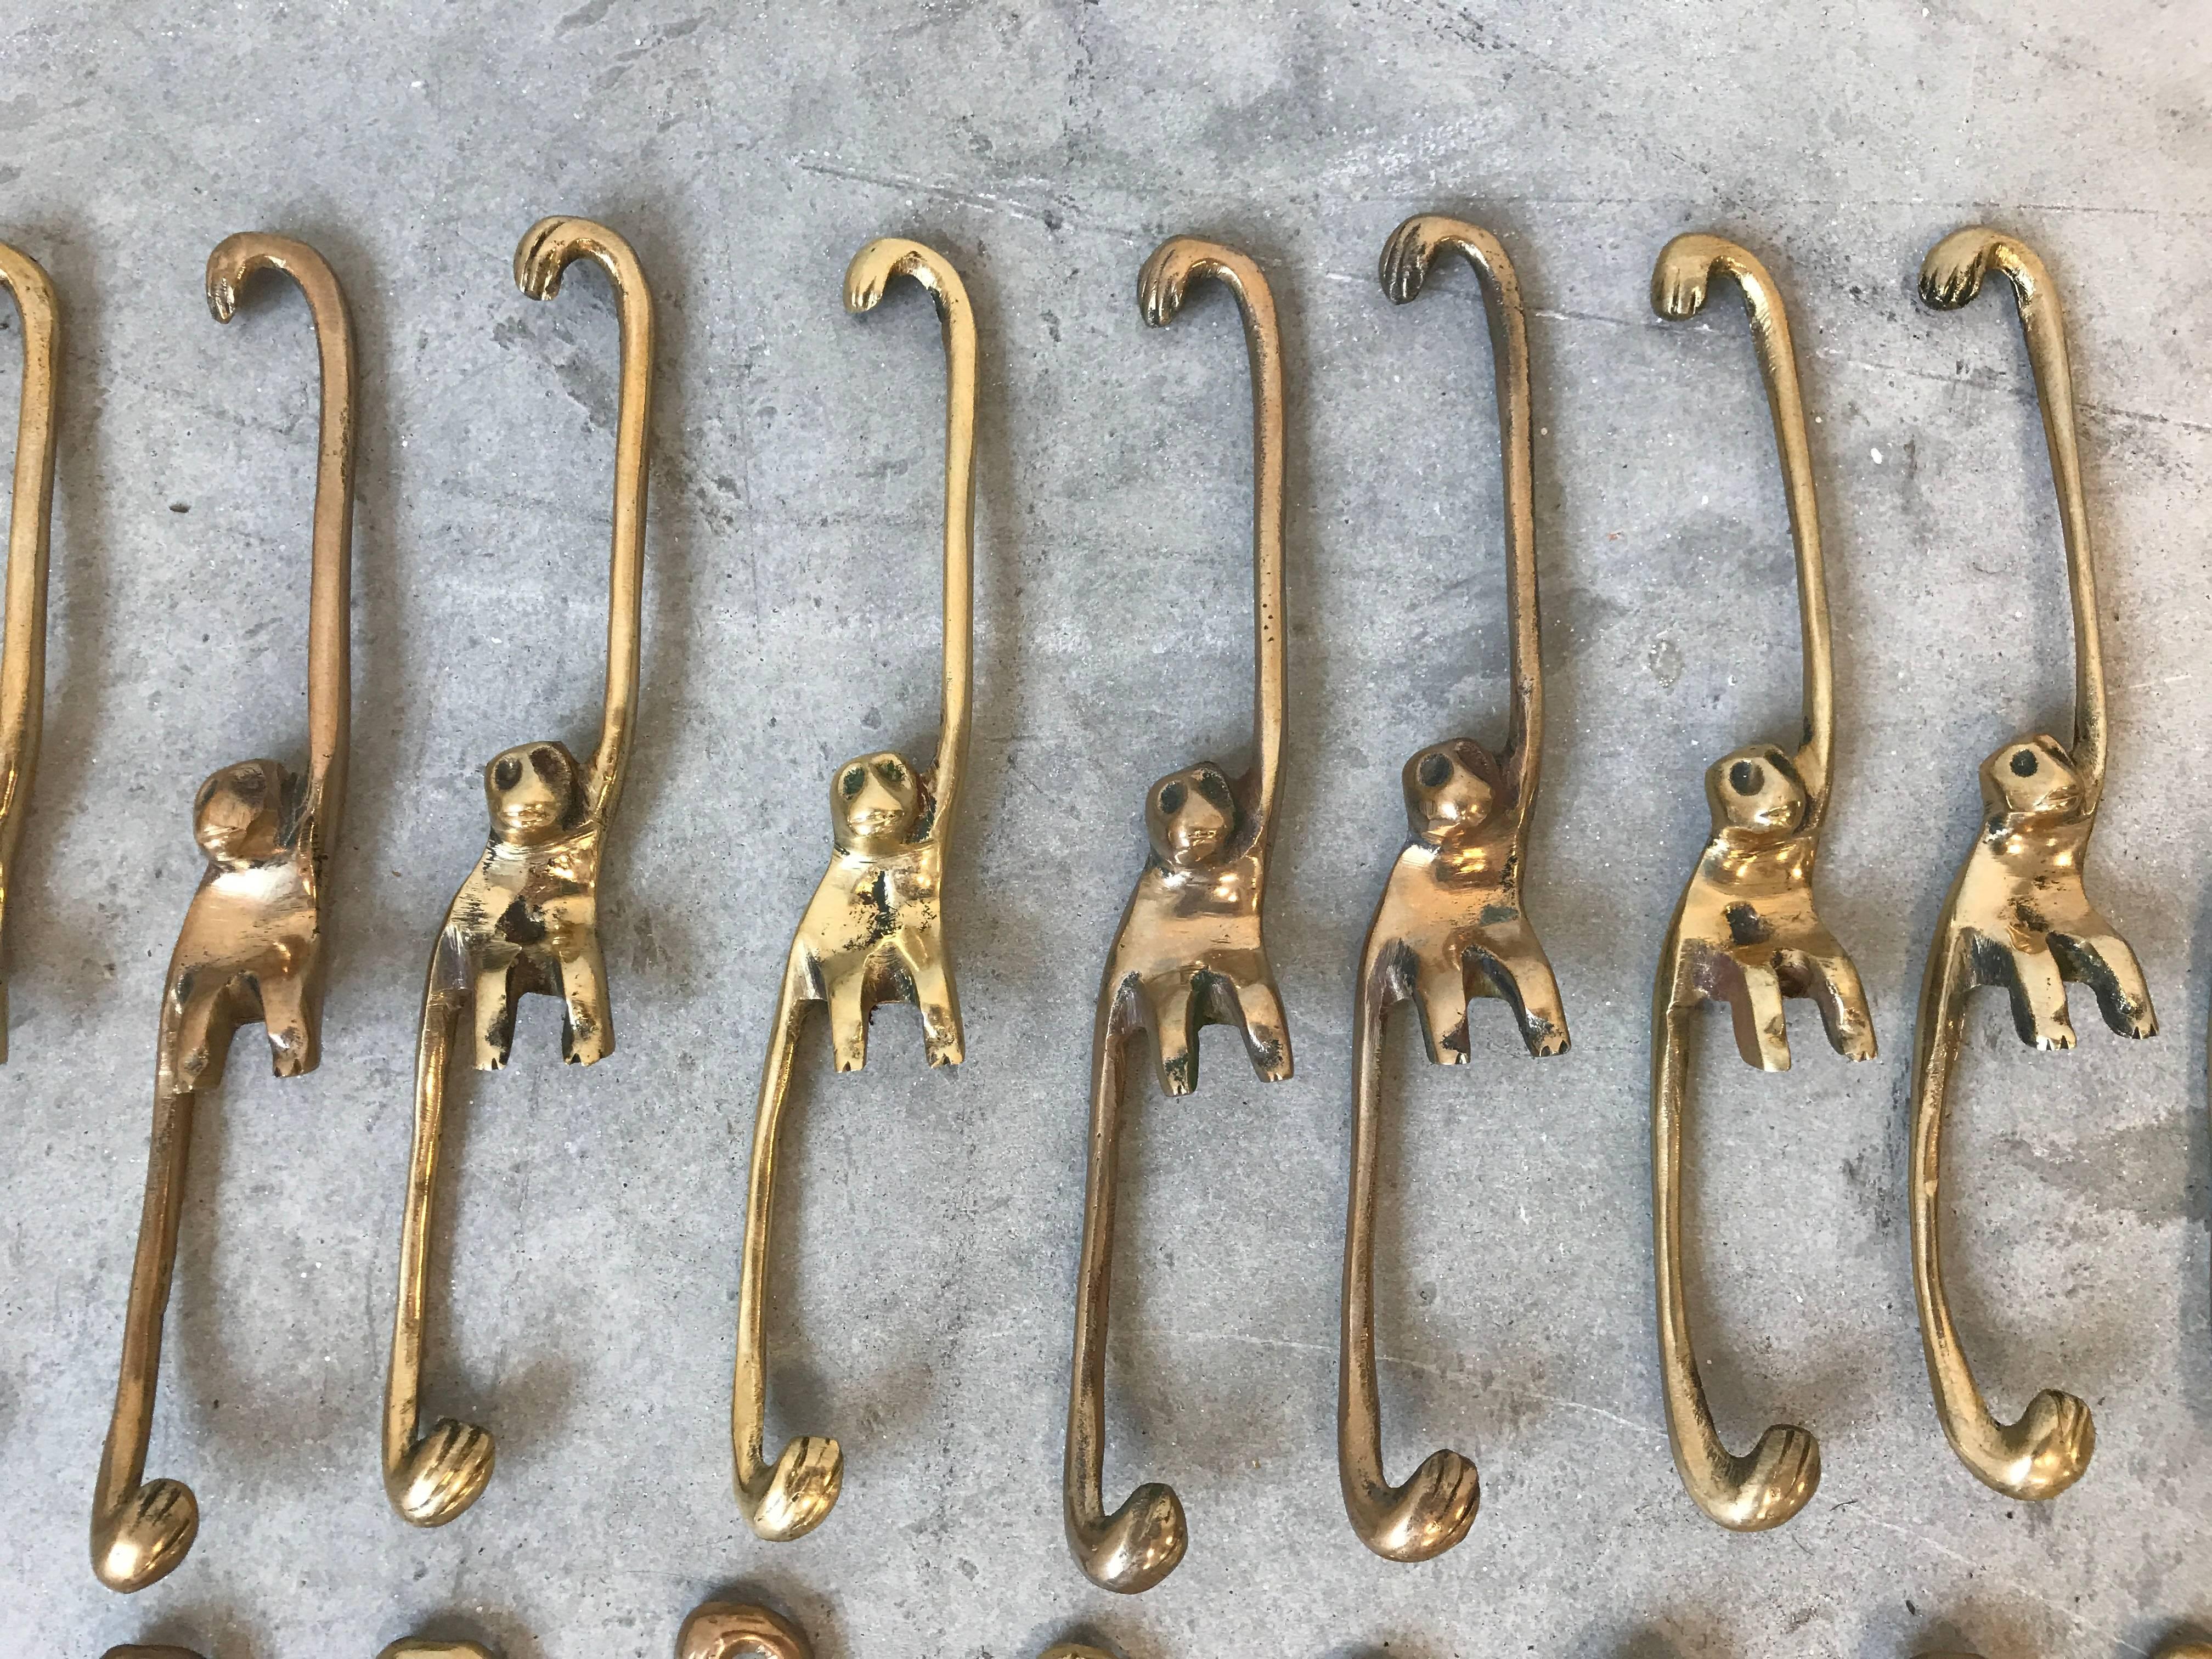 Offered is a fabulous, set of 24, 1960s solid-brass hanging 'Barrel of Monkeys' game. Also great as decorative hangers for plants, etc.